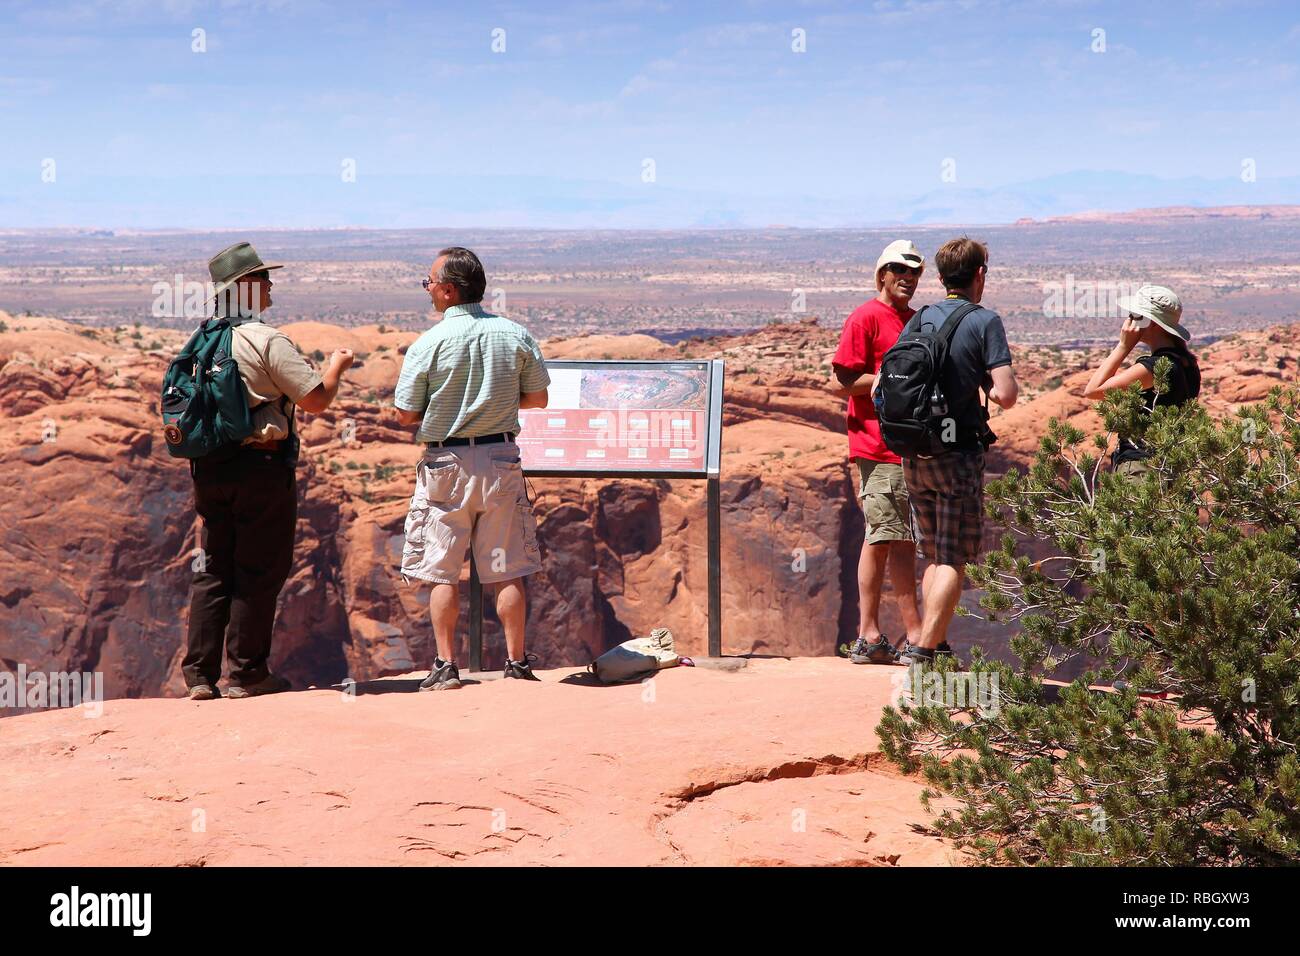 CANYONLANDS, UNITED STATES - JUNE 22, 2013: People admire landscape in Canyonlands National Park, USA. More than 452,000 people visited Canyonlands NP Stock Photo